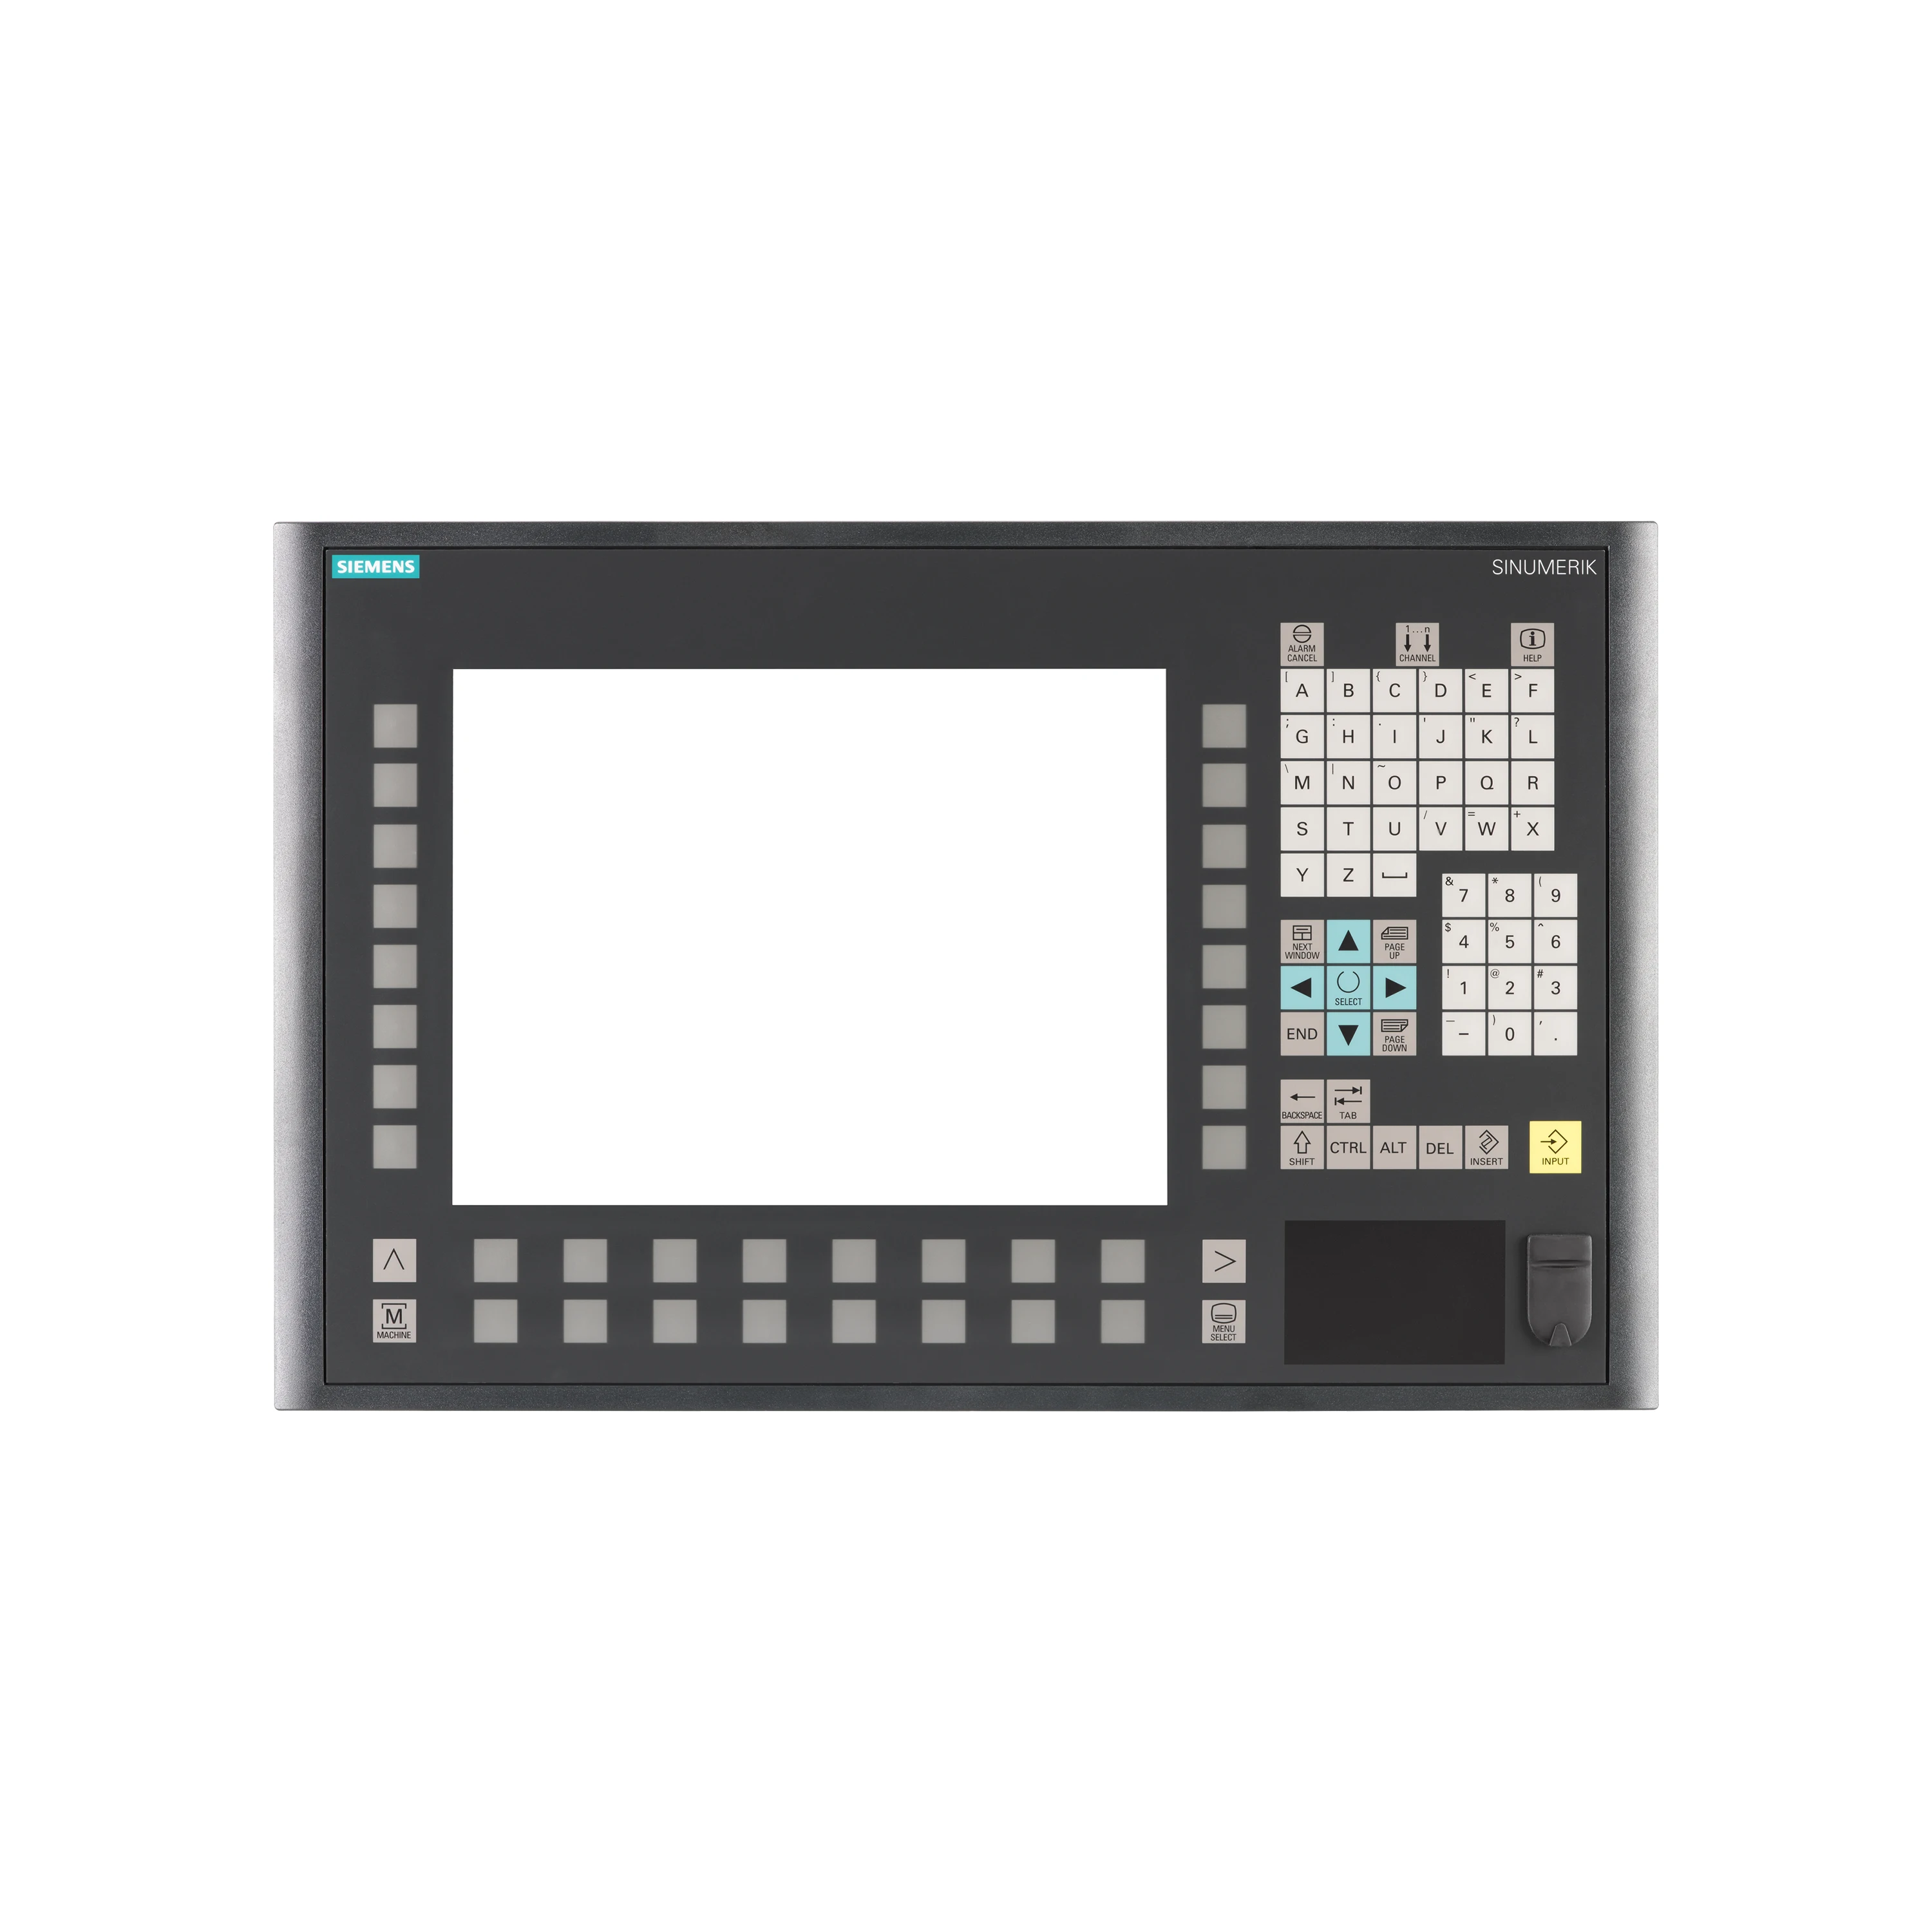 100% Brand and Package New Panel Control Unit CNC Touch Screen PLC OP012 HMI 6FC5203-0AF02-0AA2 for Siemens